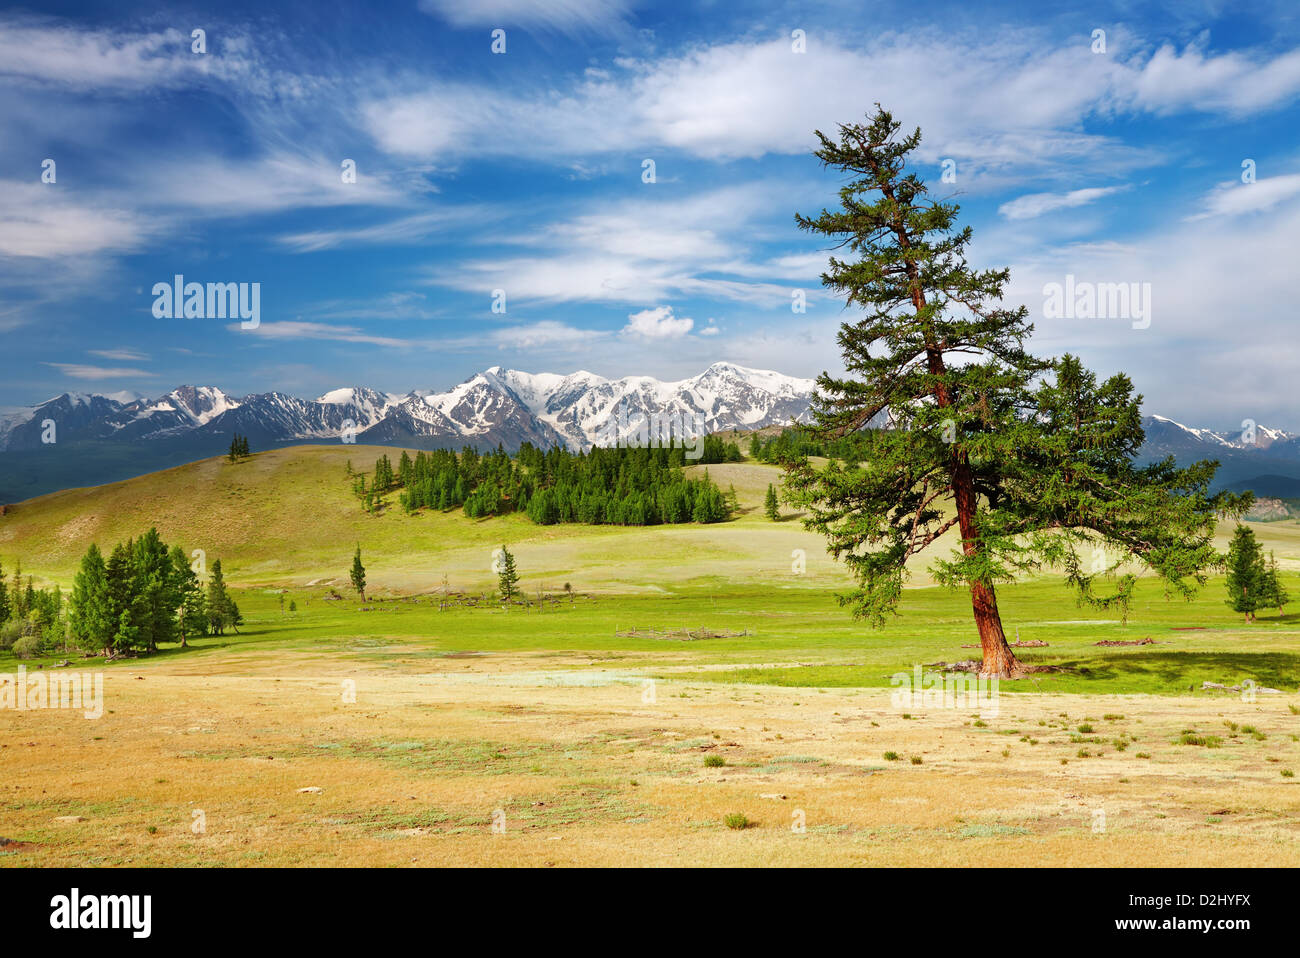 Mountain landscape with trees and blue sky Stock Photo